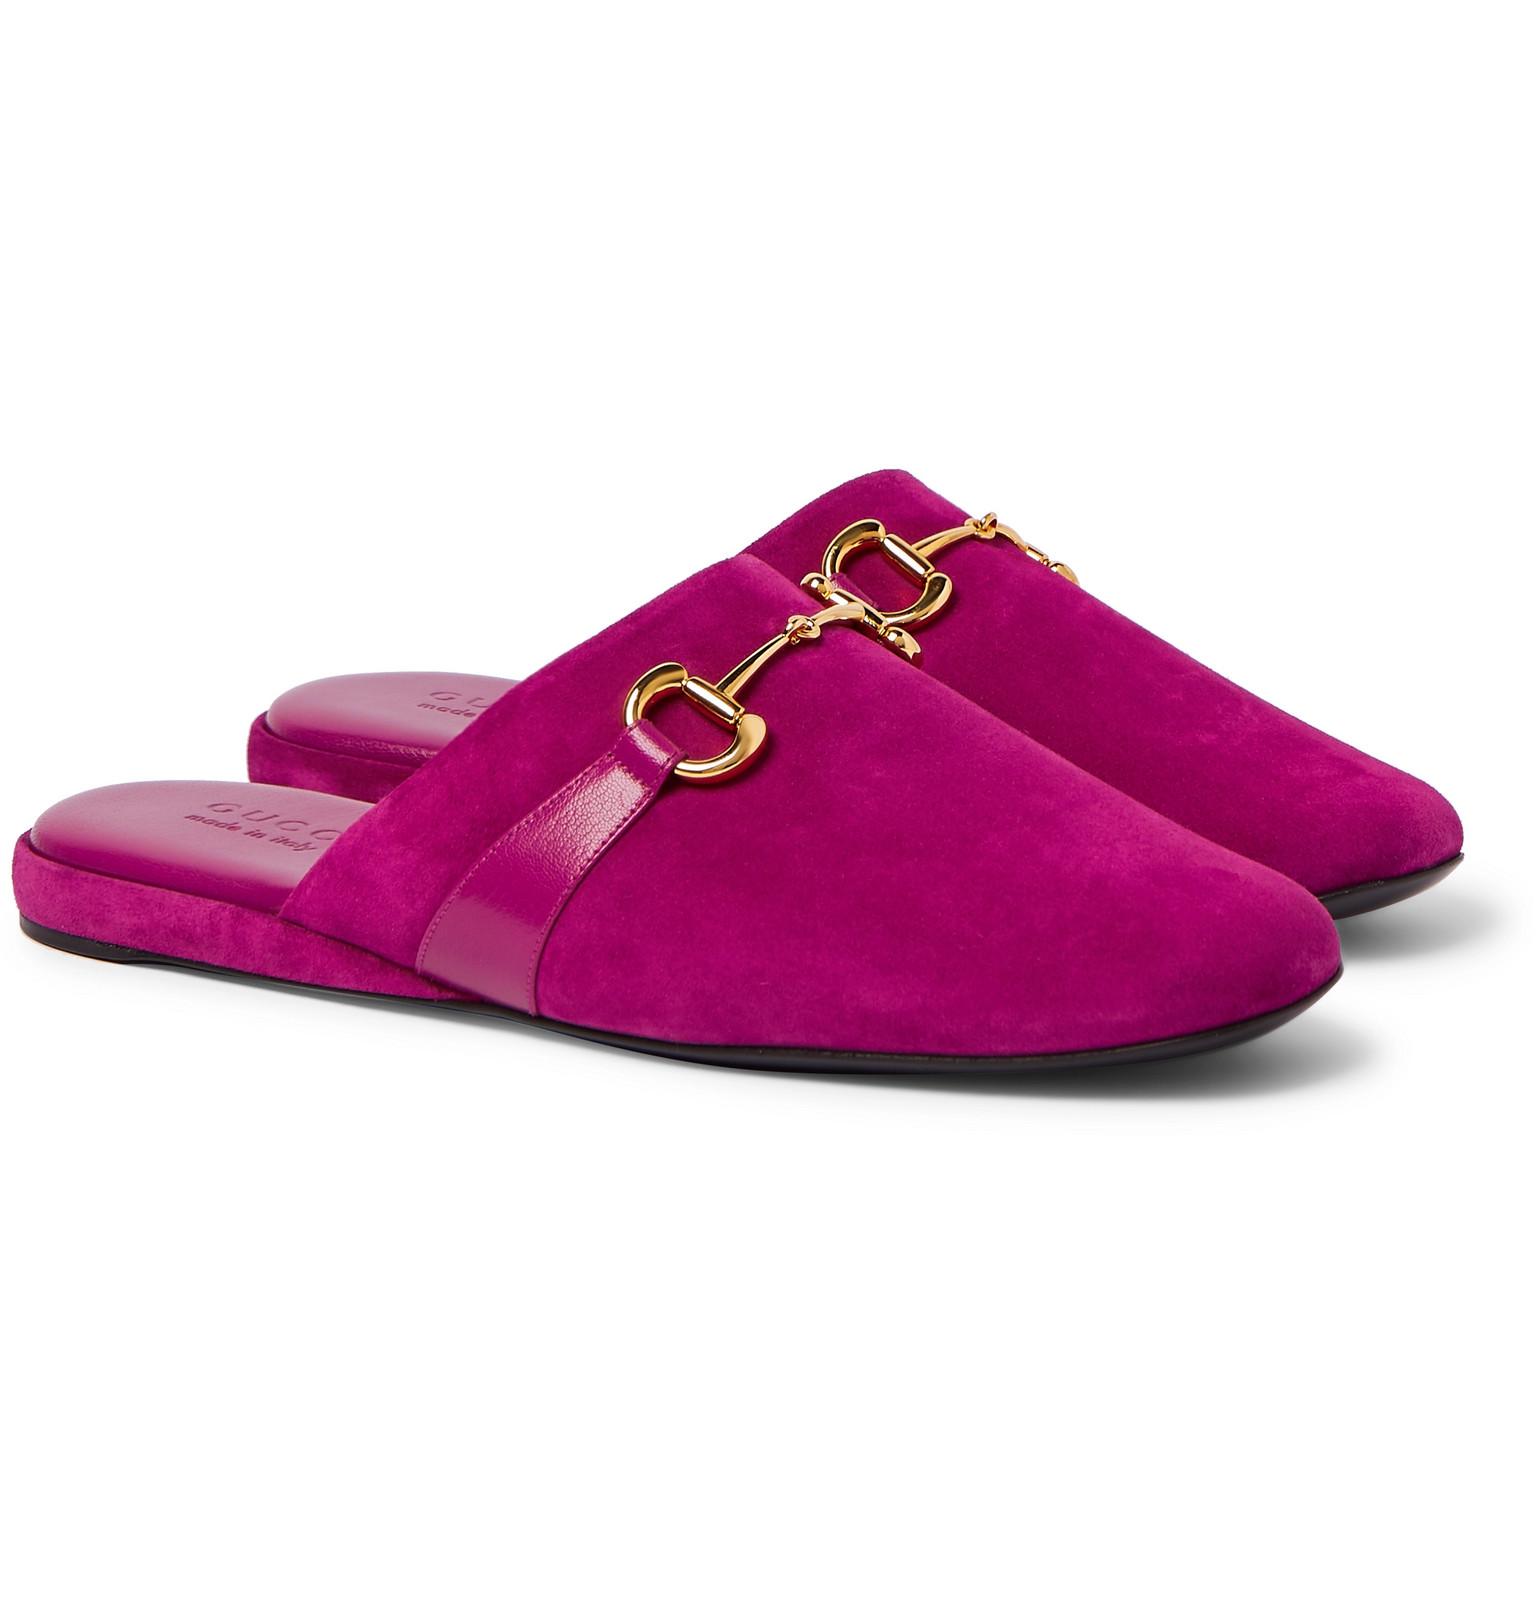 Gucci Pericle Horsebit Suede Slippers in Pink for Men - Lyst